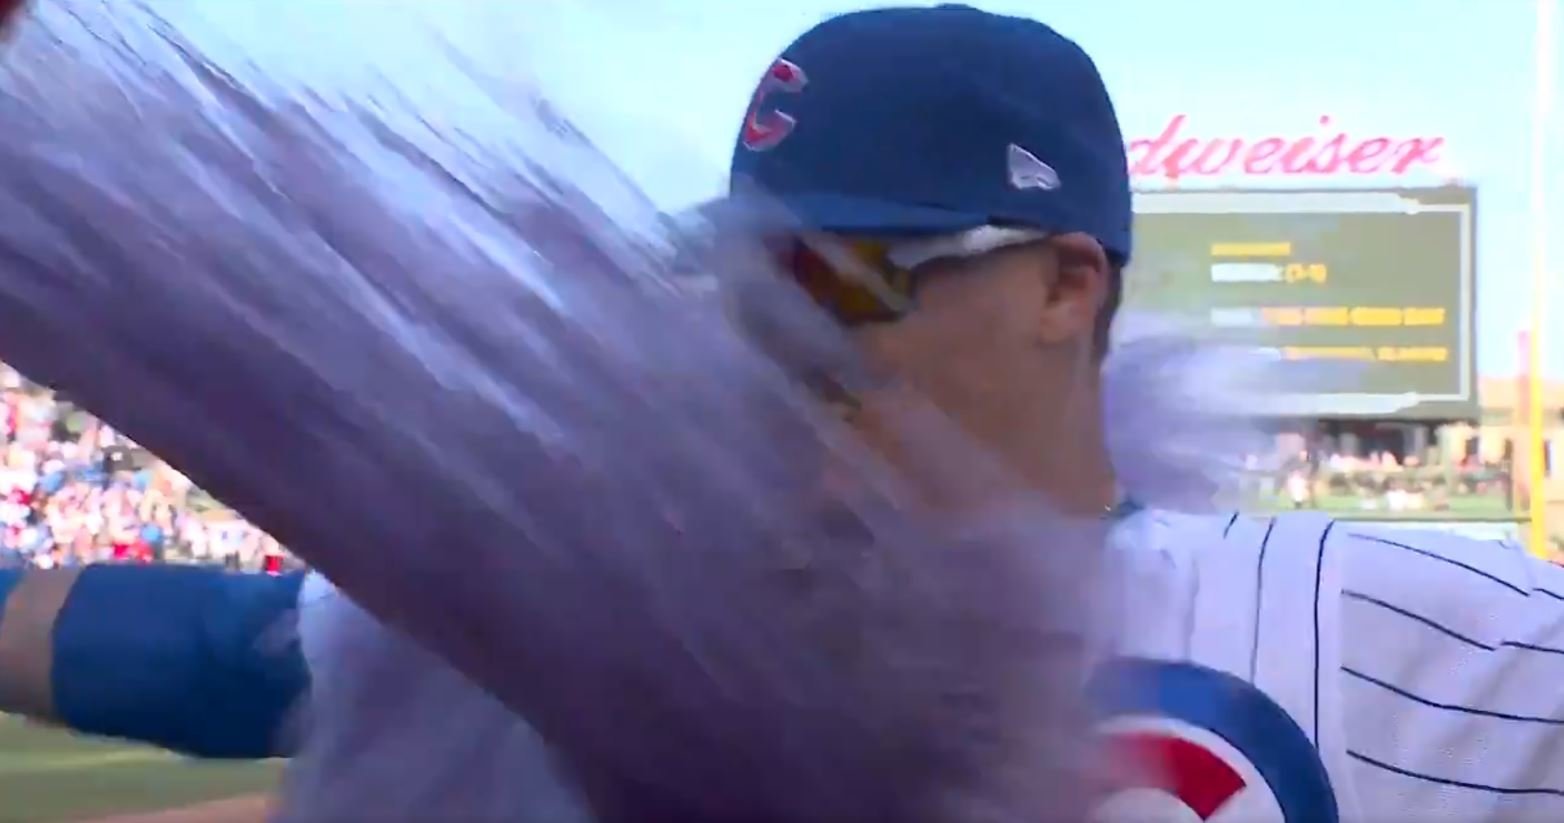 Chicago Cubs shortstop Javier Baez received a Gatorade bath after hitting a game-winning home run on Saturday.